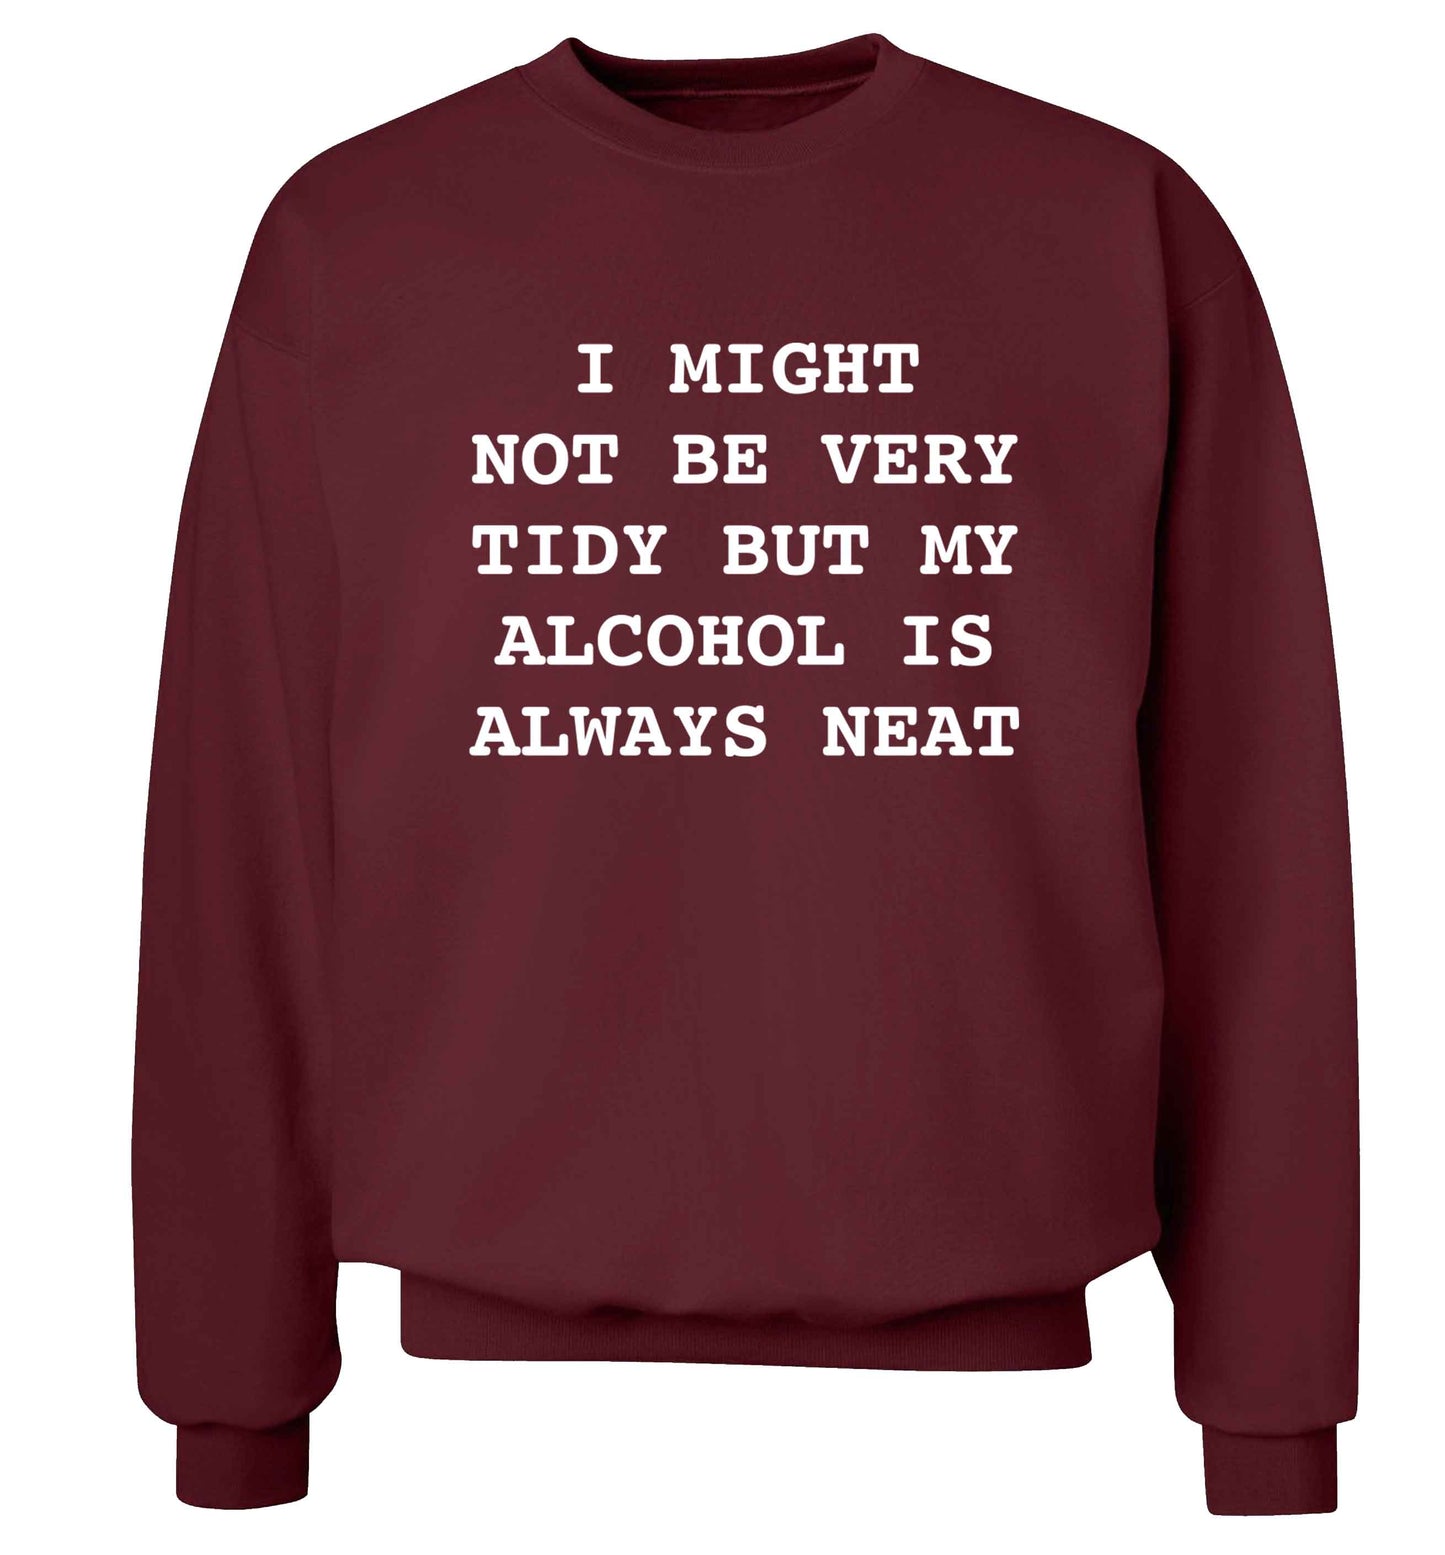 I might not be tidy but my alcohol is always neat Adult's unisex maroon Sweater 2XL